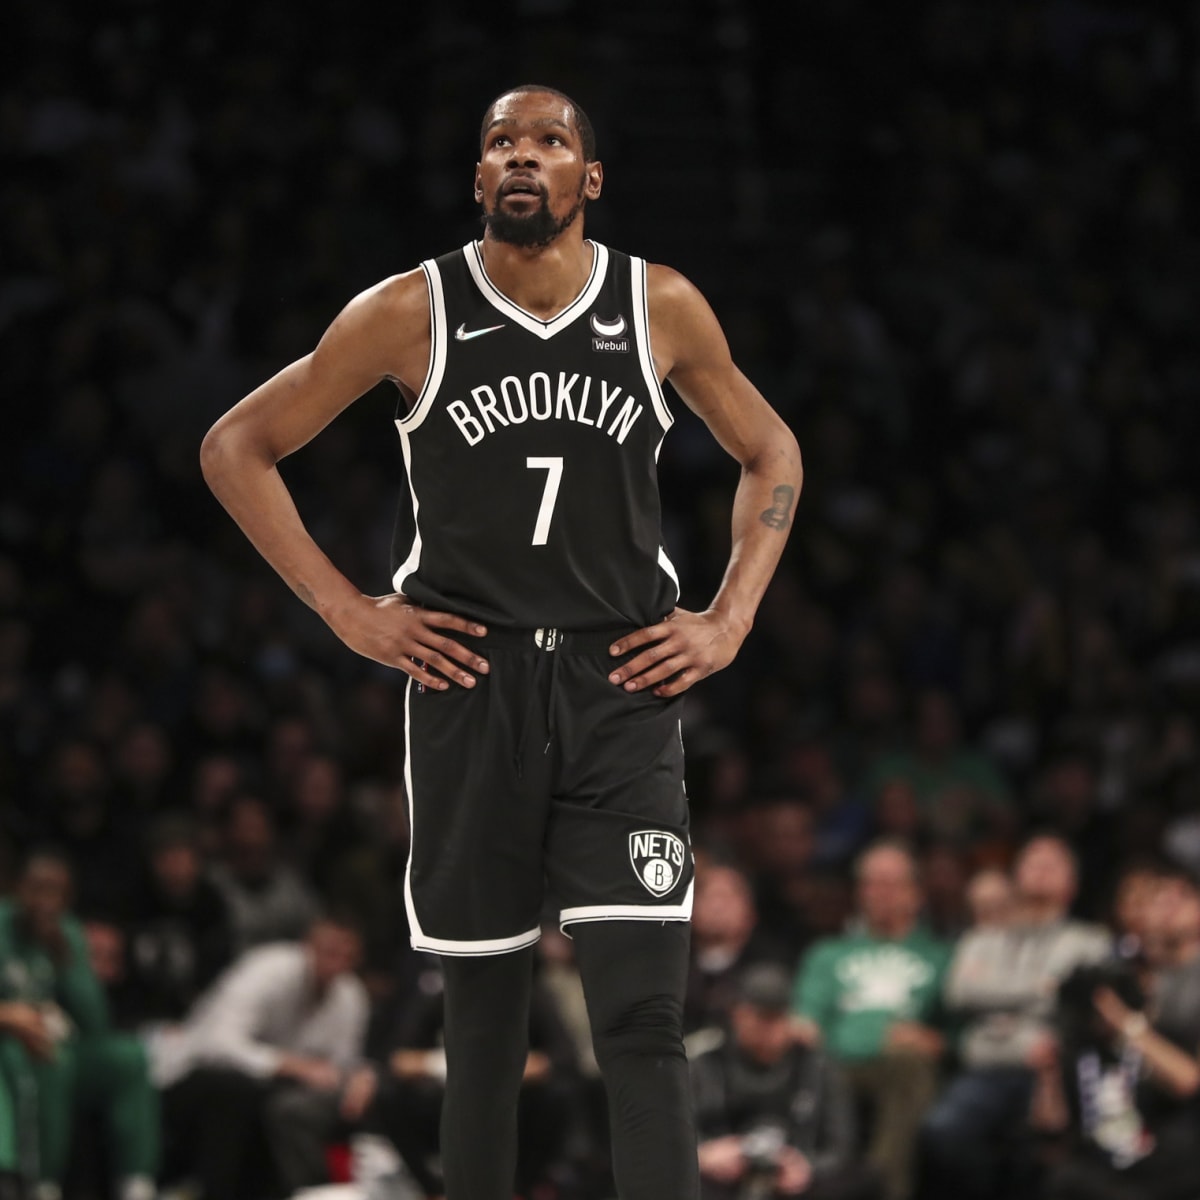 Suns get All-Star Kevin Durant in trade with Nets, reports say